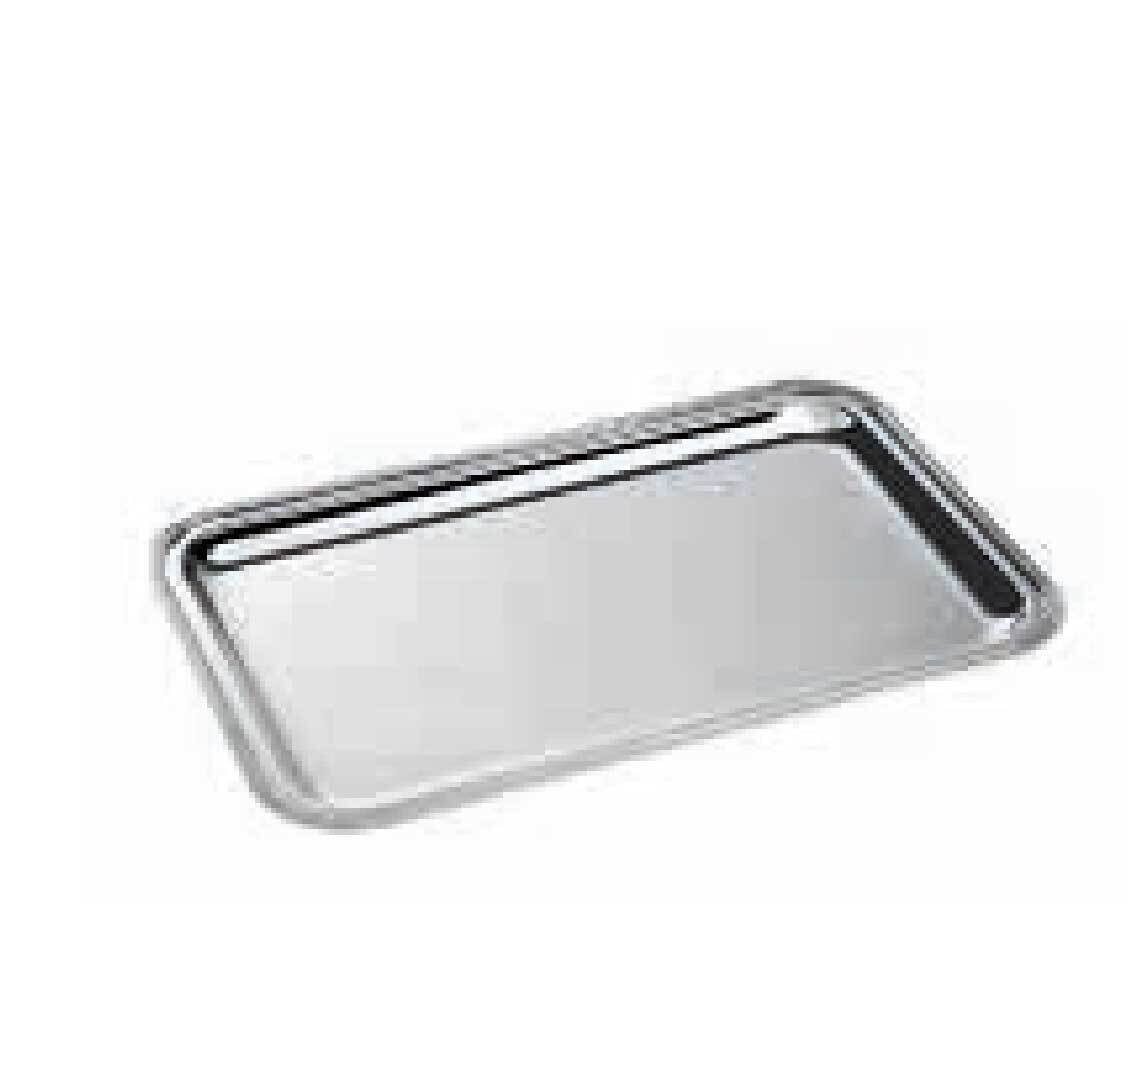 Ercuis Rencontre Rectangular Serving Tray 11.375 x 8.25 Inch Silver Plated F522451-30